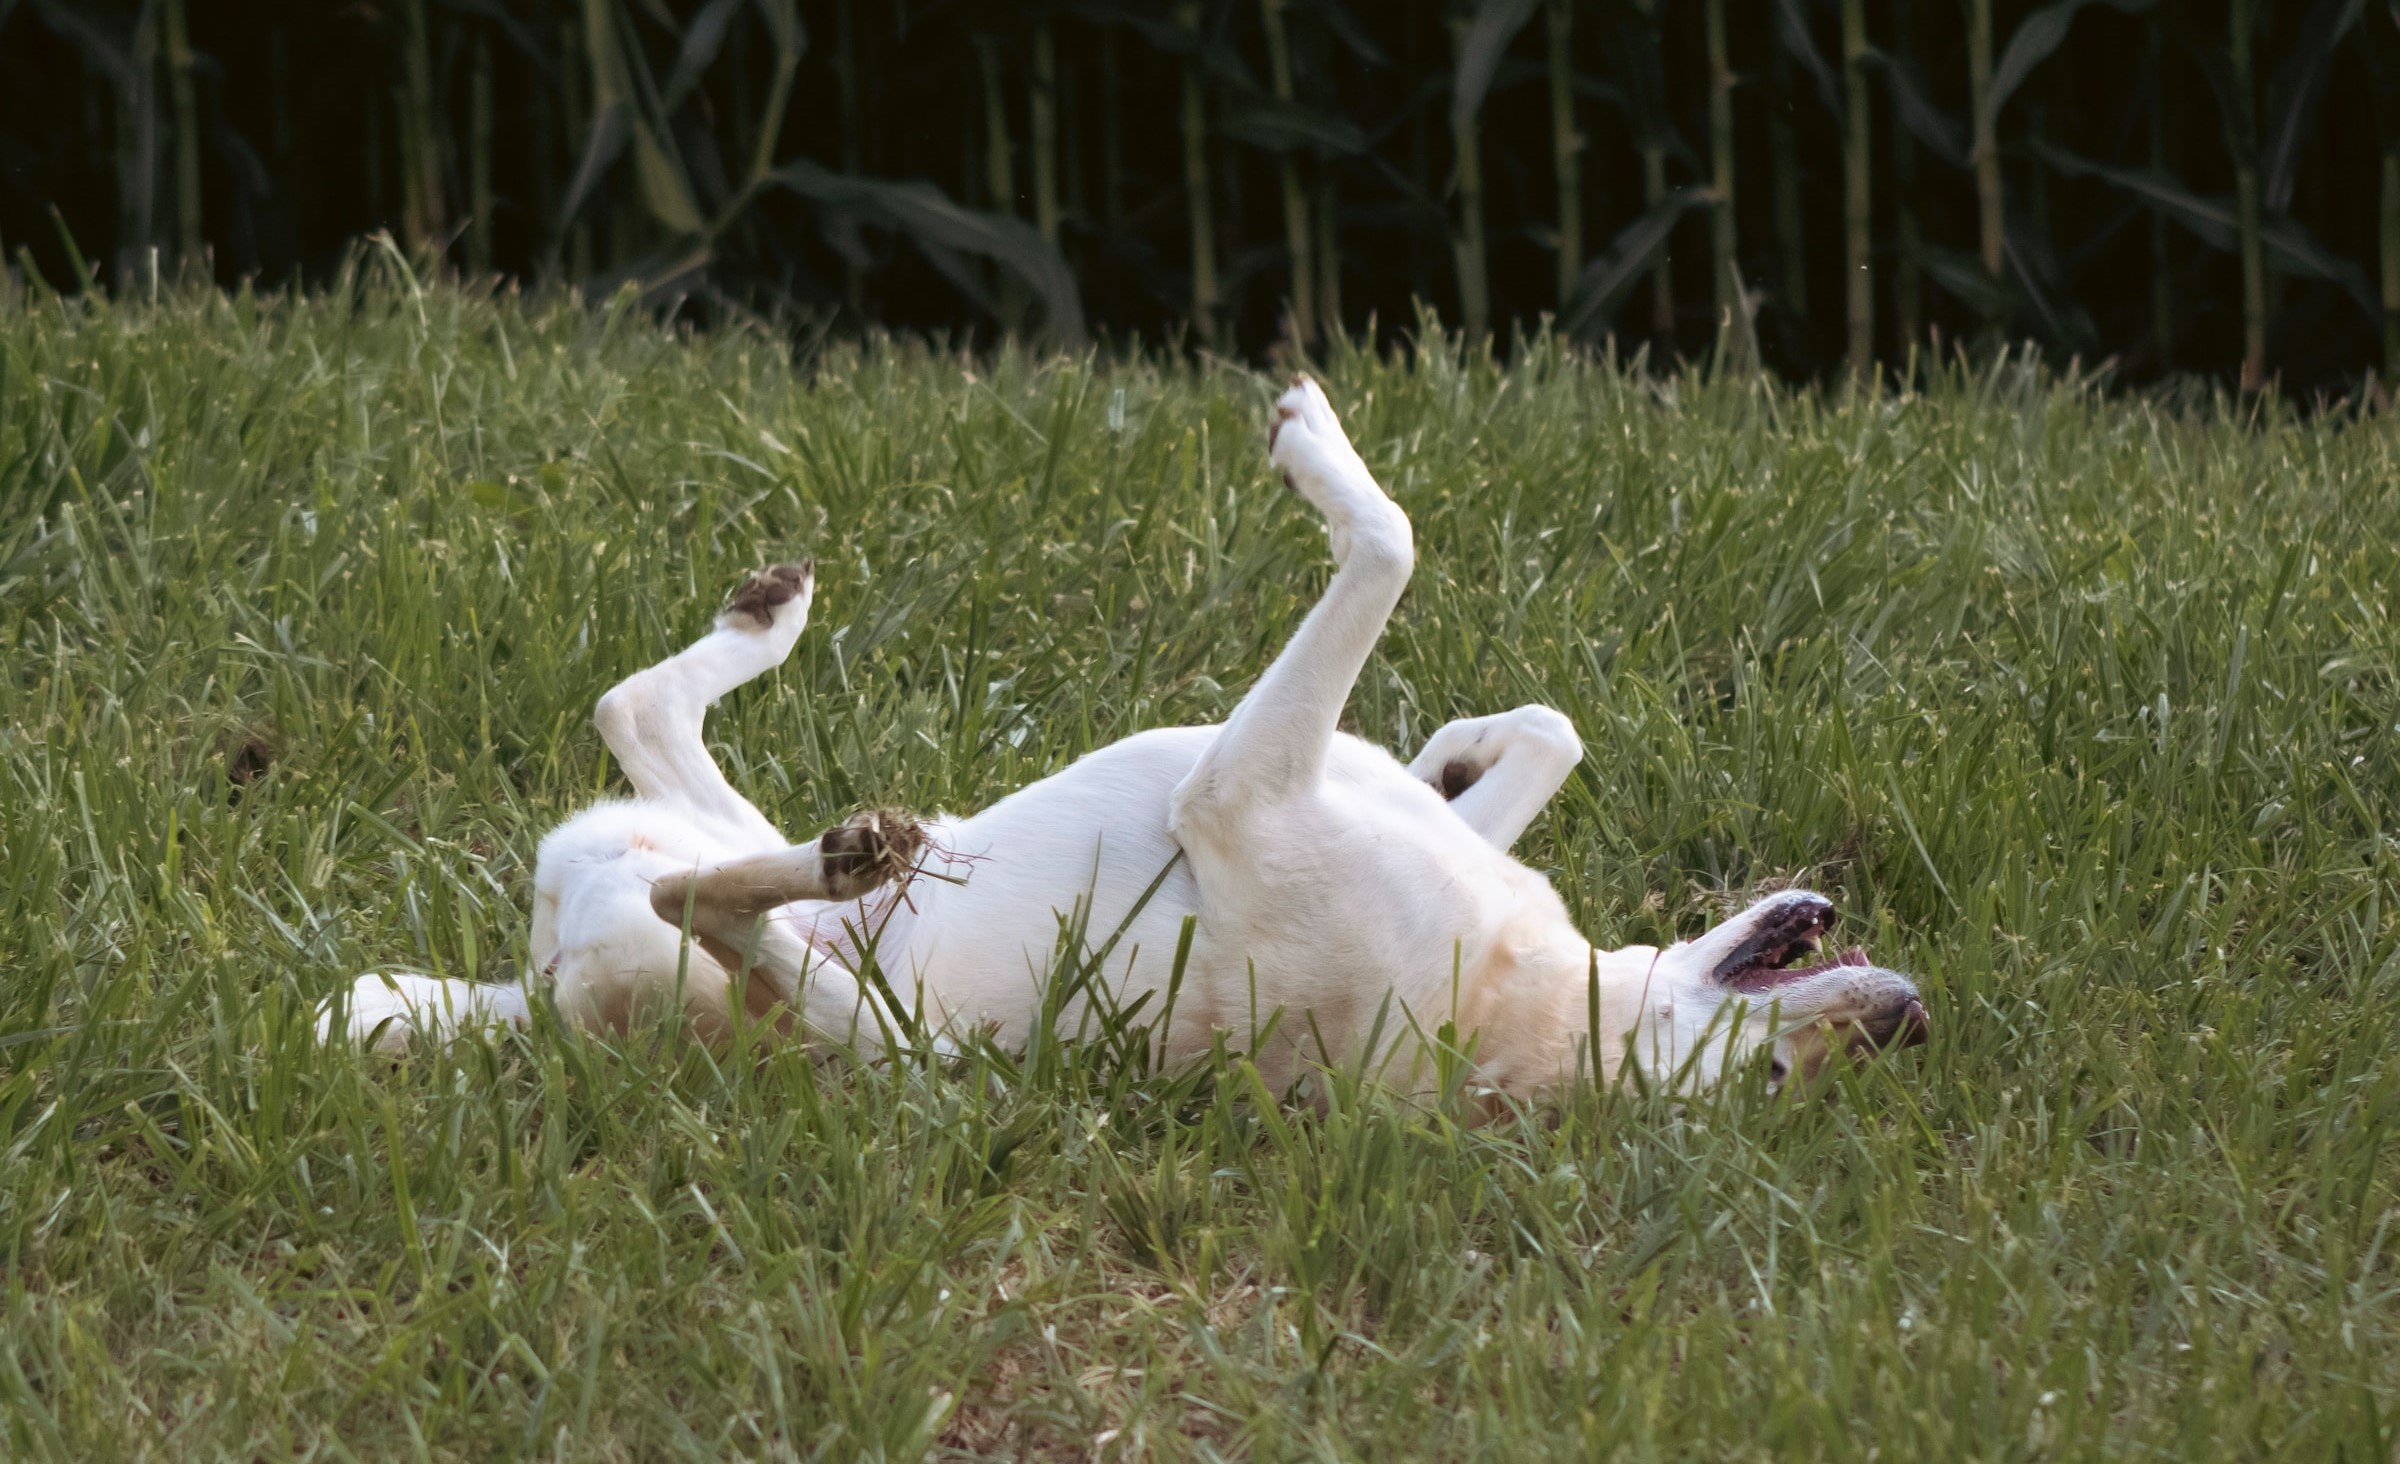 A Labrador rolling around in a field